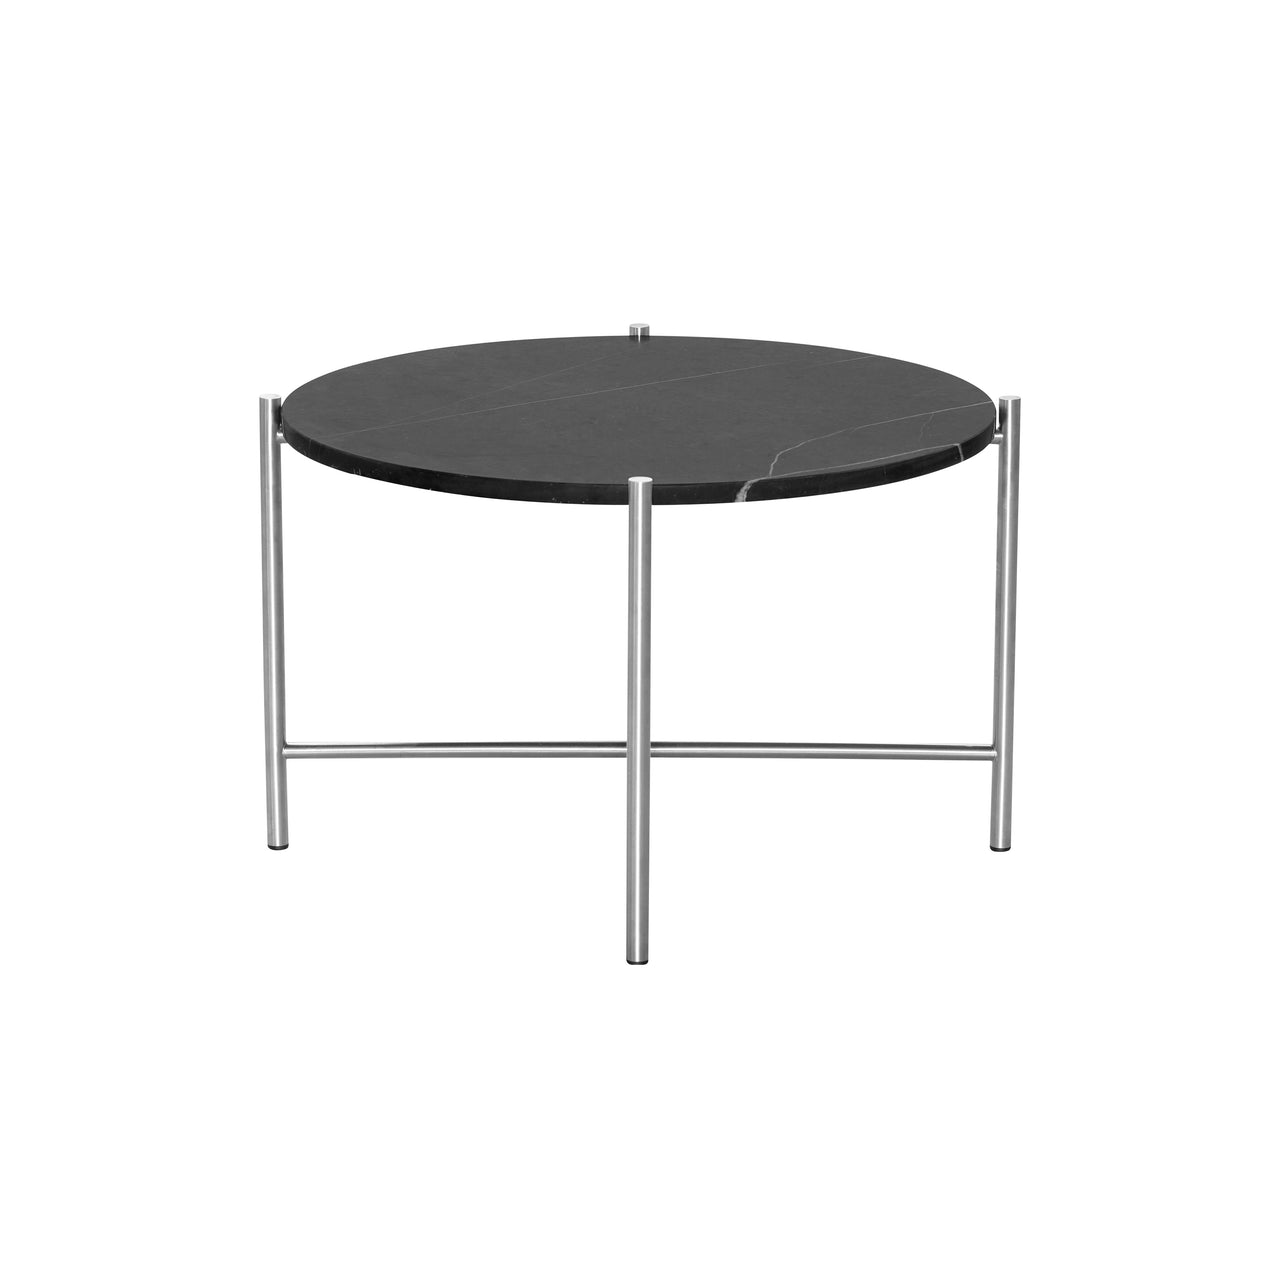 Round Coffee Table: Small - 25.6